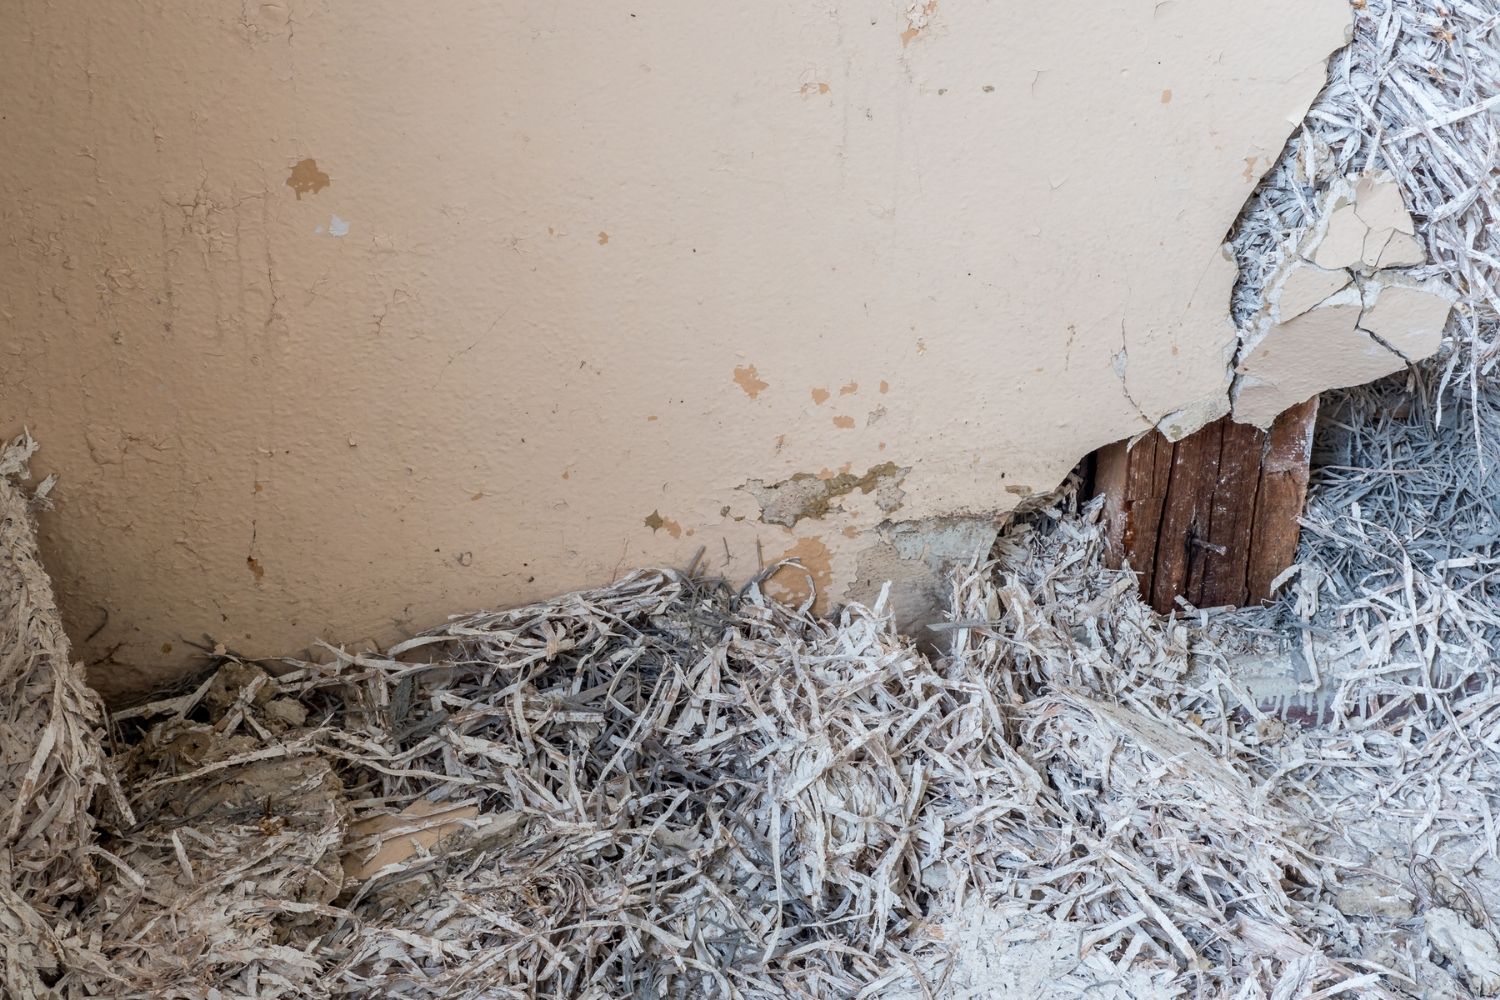 What Does Asbestos Insulation Look Like